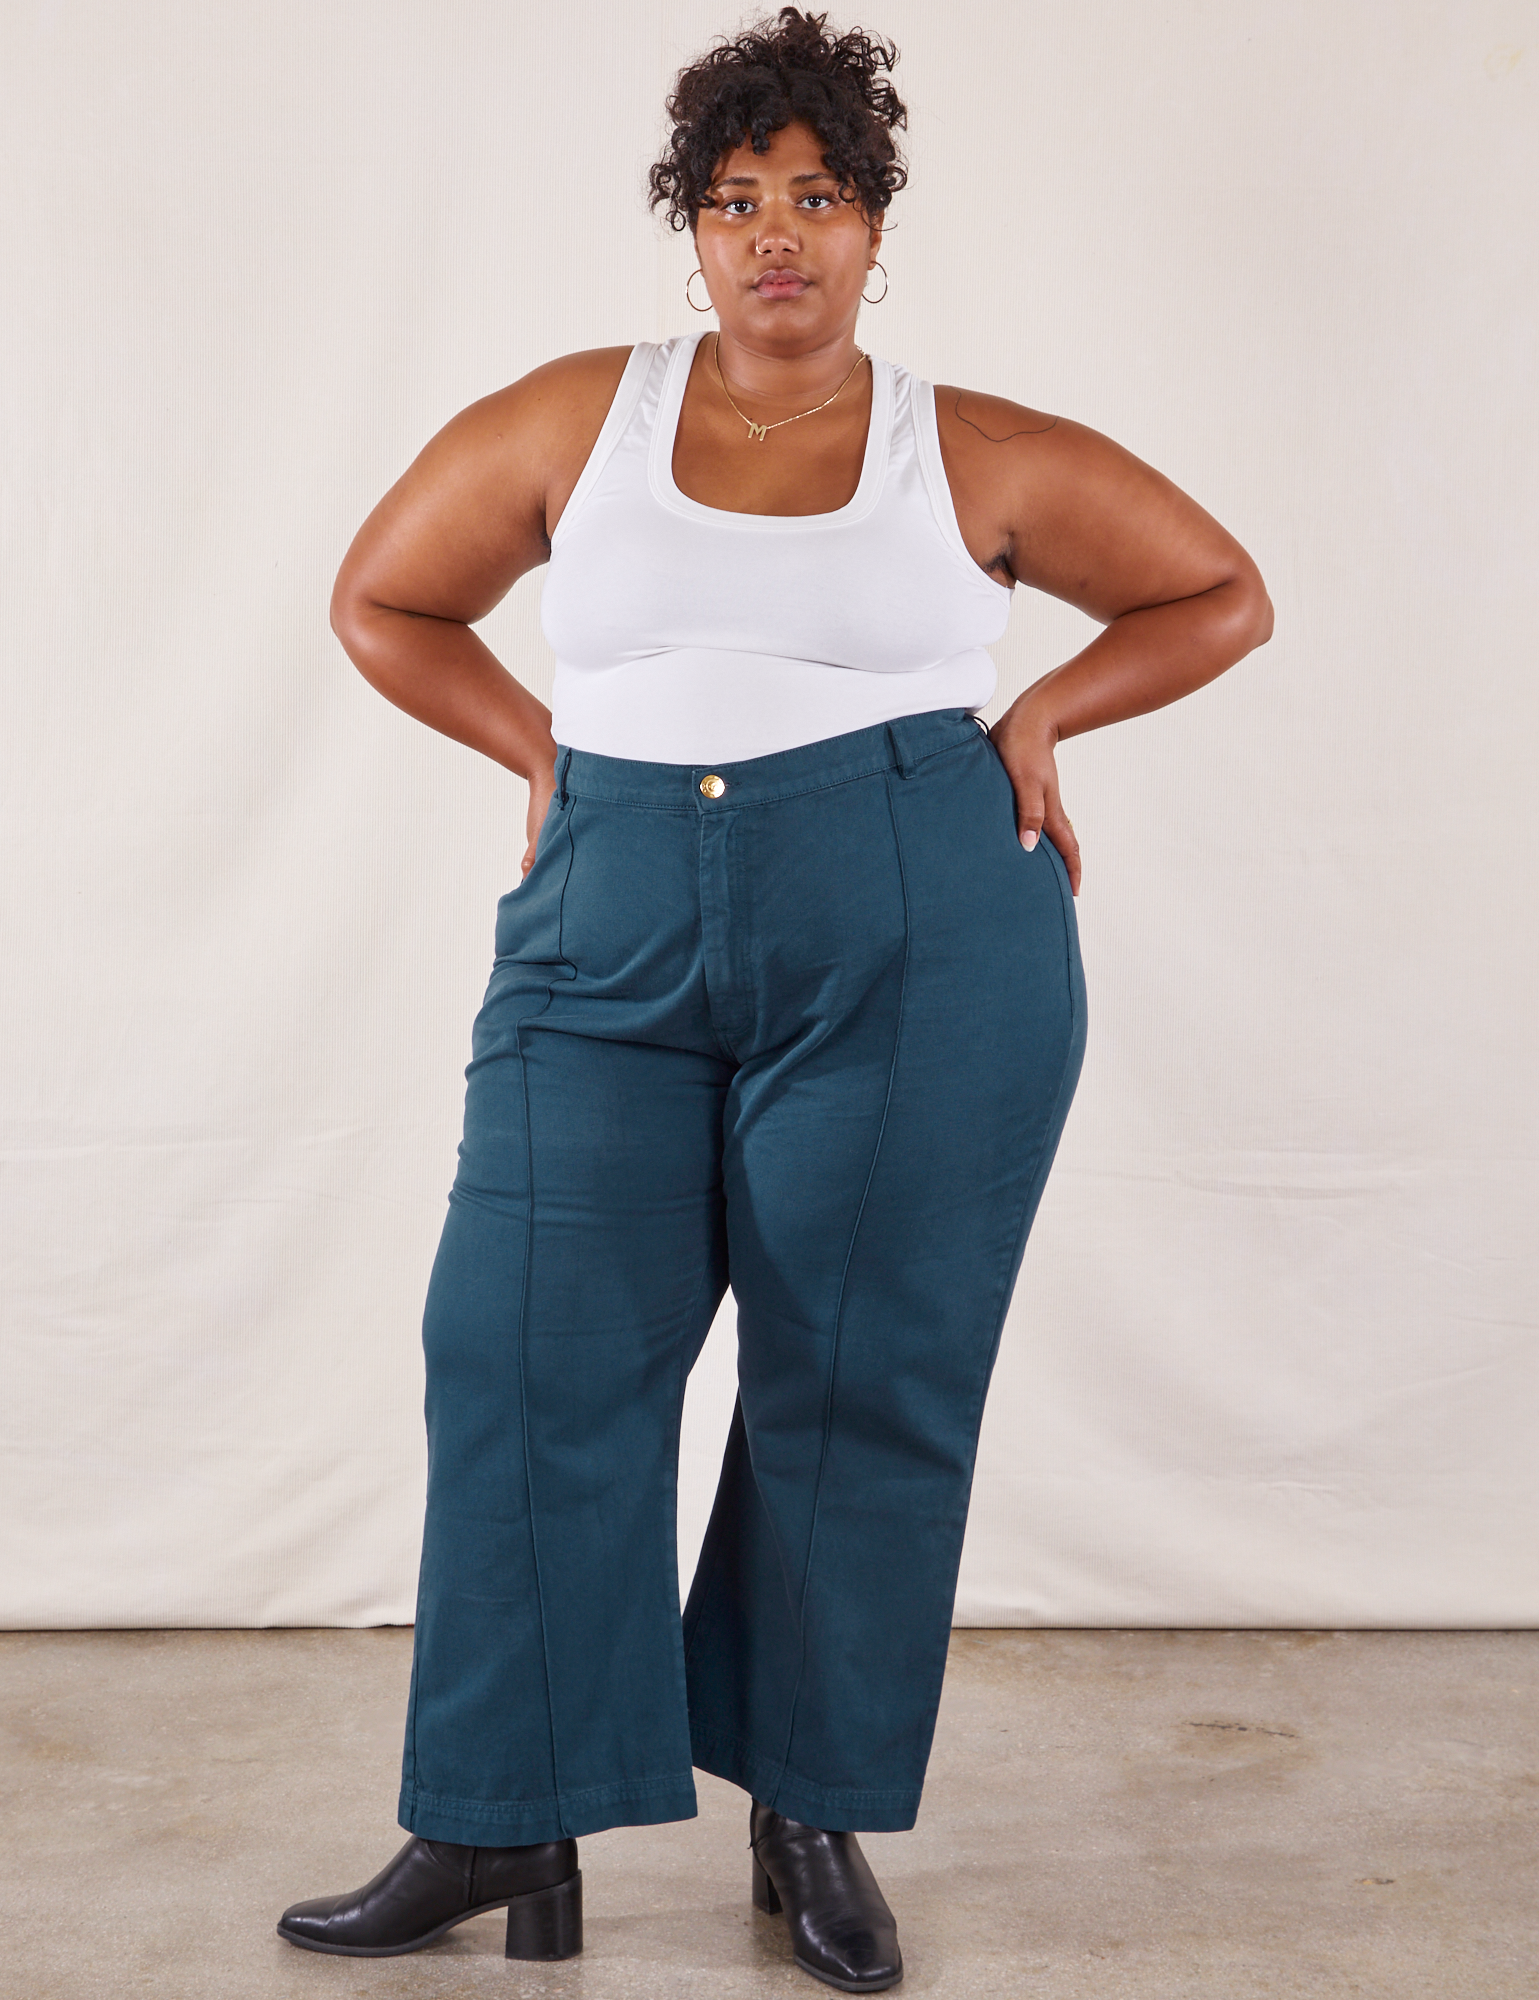 Morgan is 5&#39;5&quot; and wearing 2XL Western Pants in Lagoon paired with vintage tee off-white Tank Top